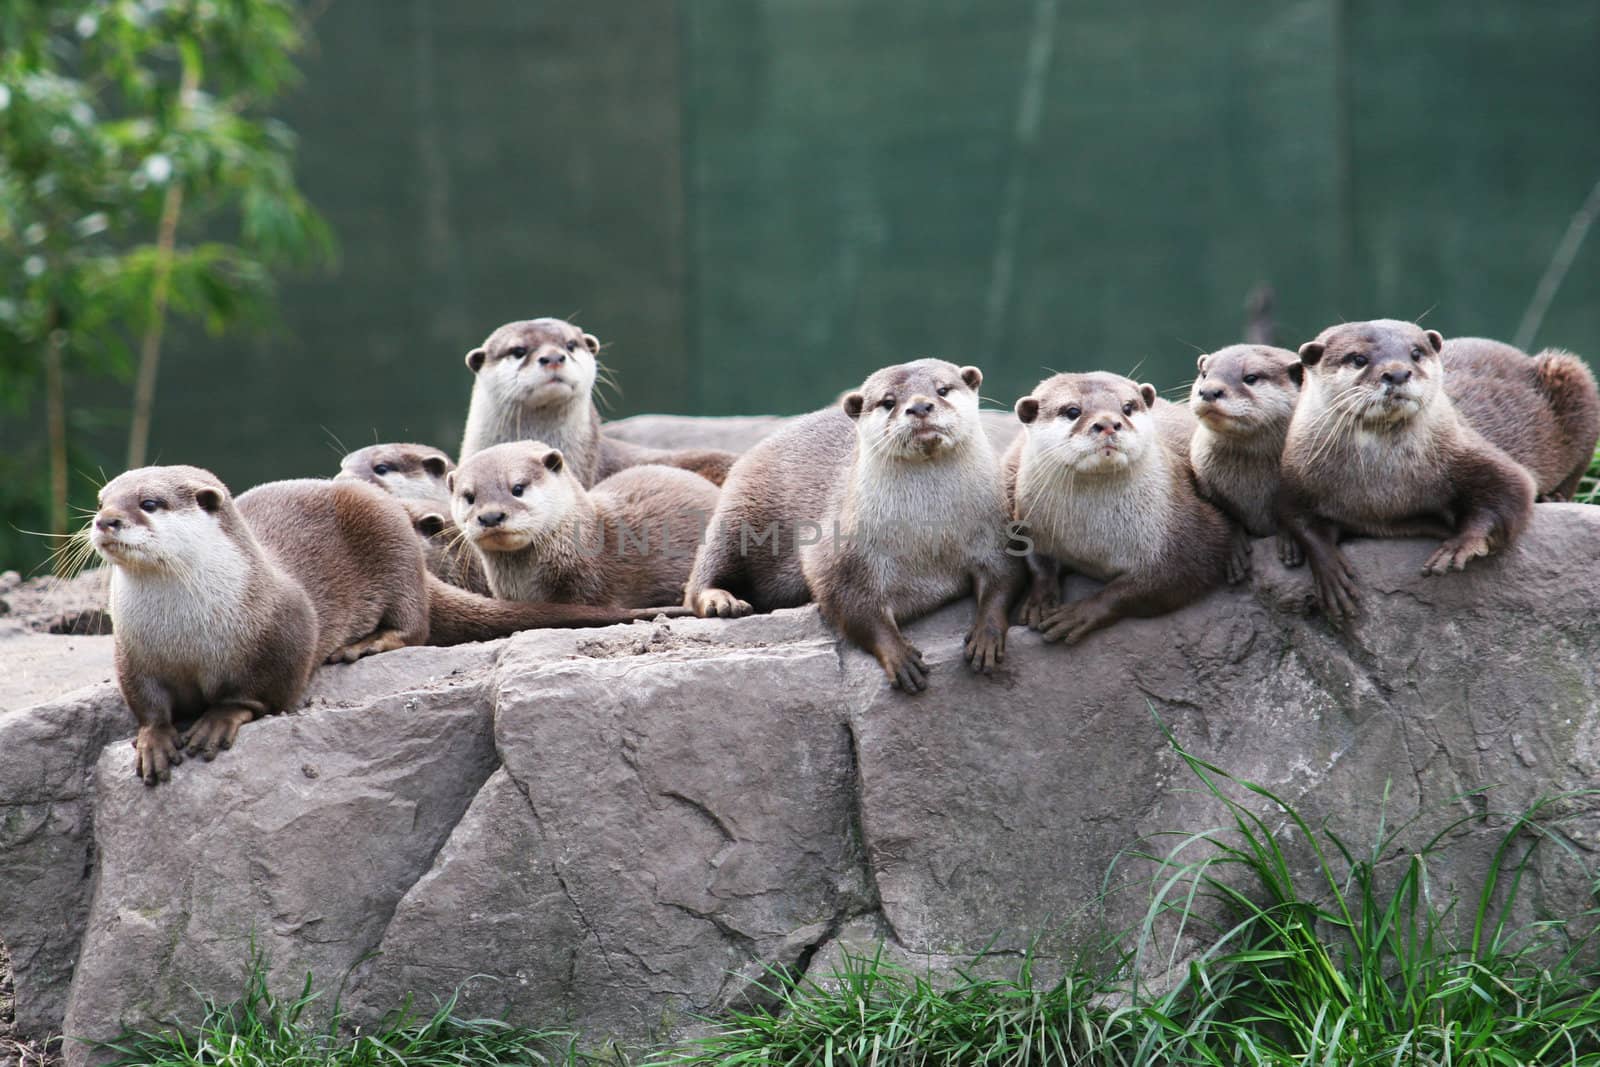 A family group of otters rest on a rock